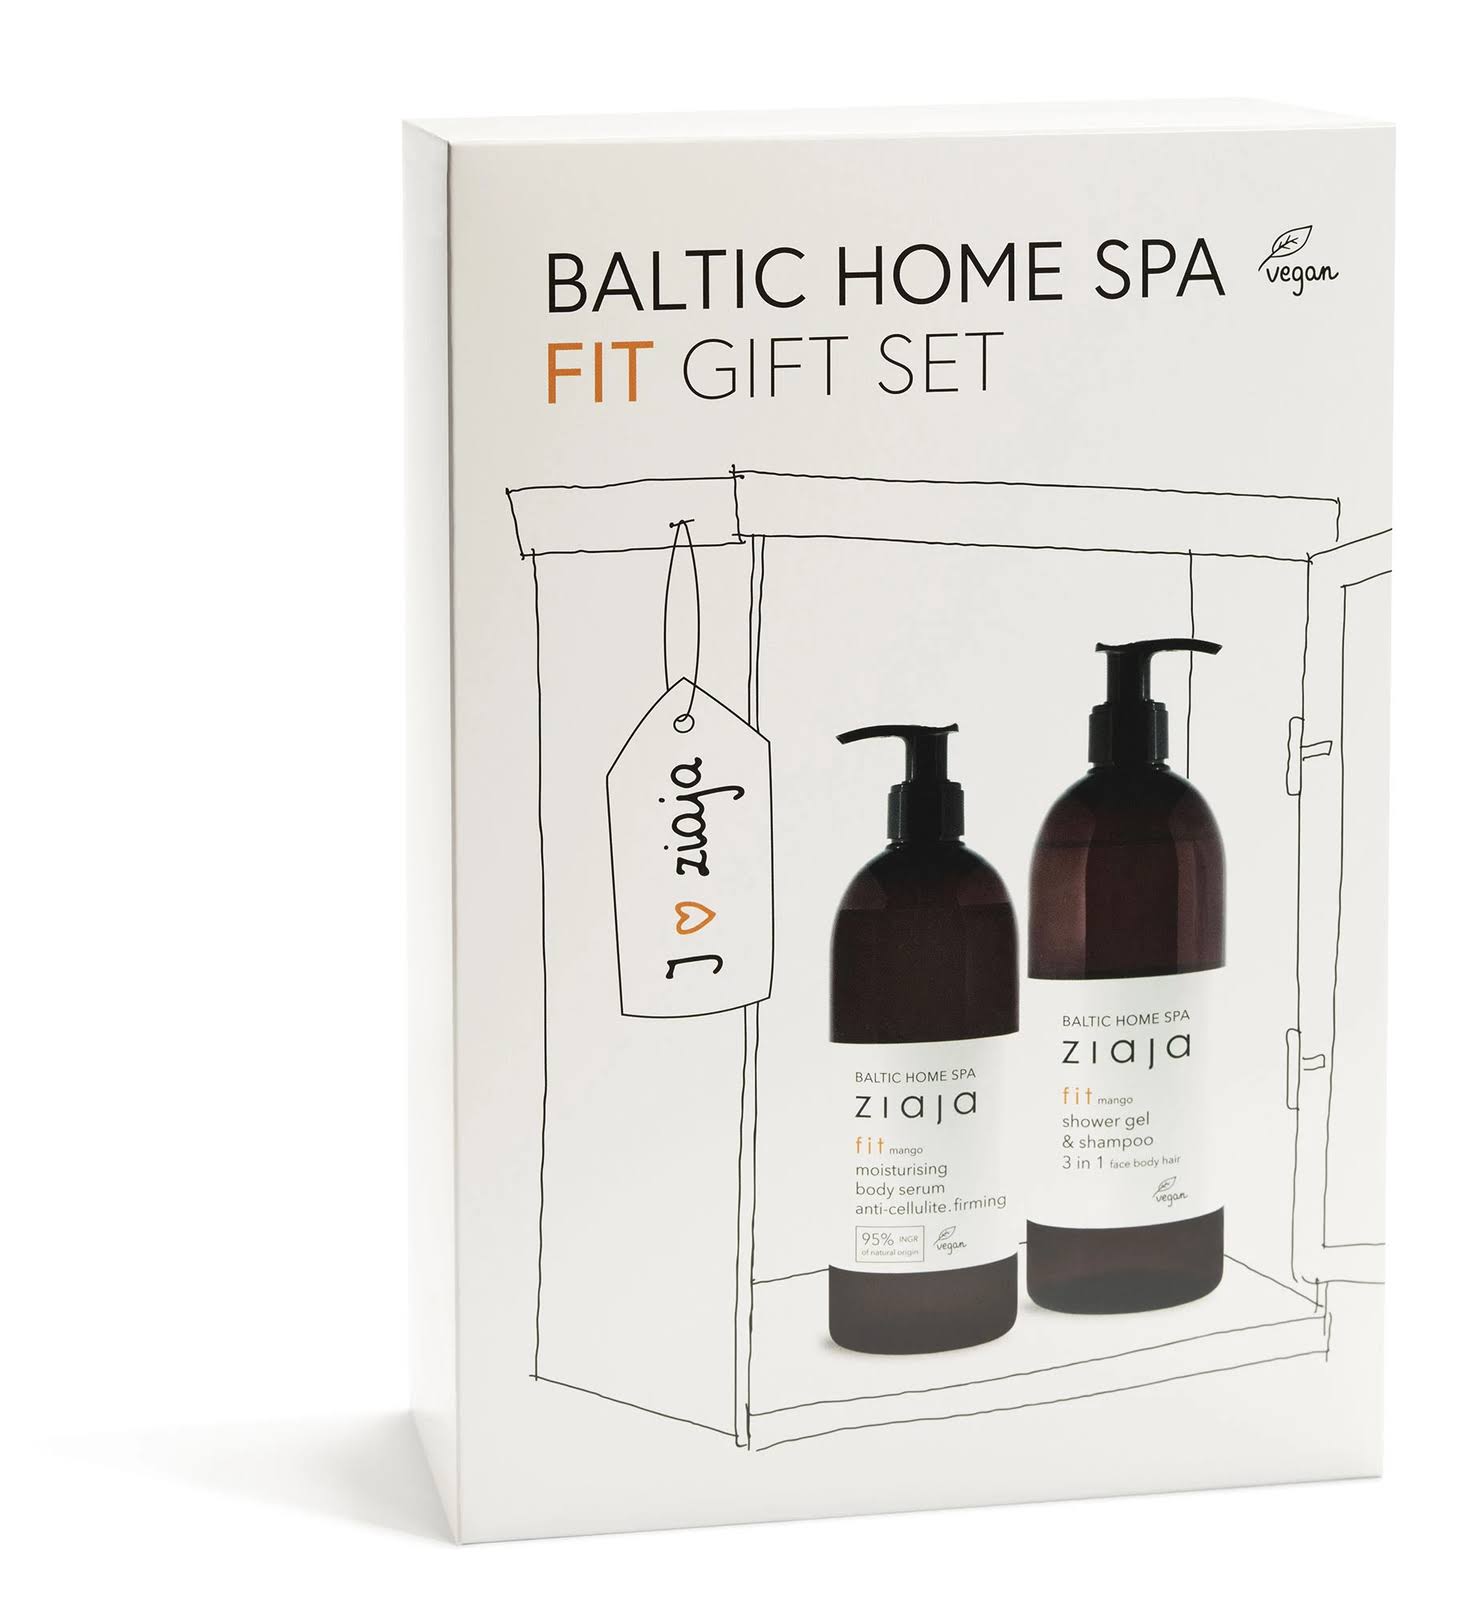 Baltic Home Spa Fit Gift Set OFFICIAL UK